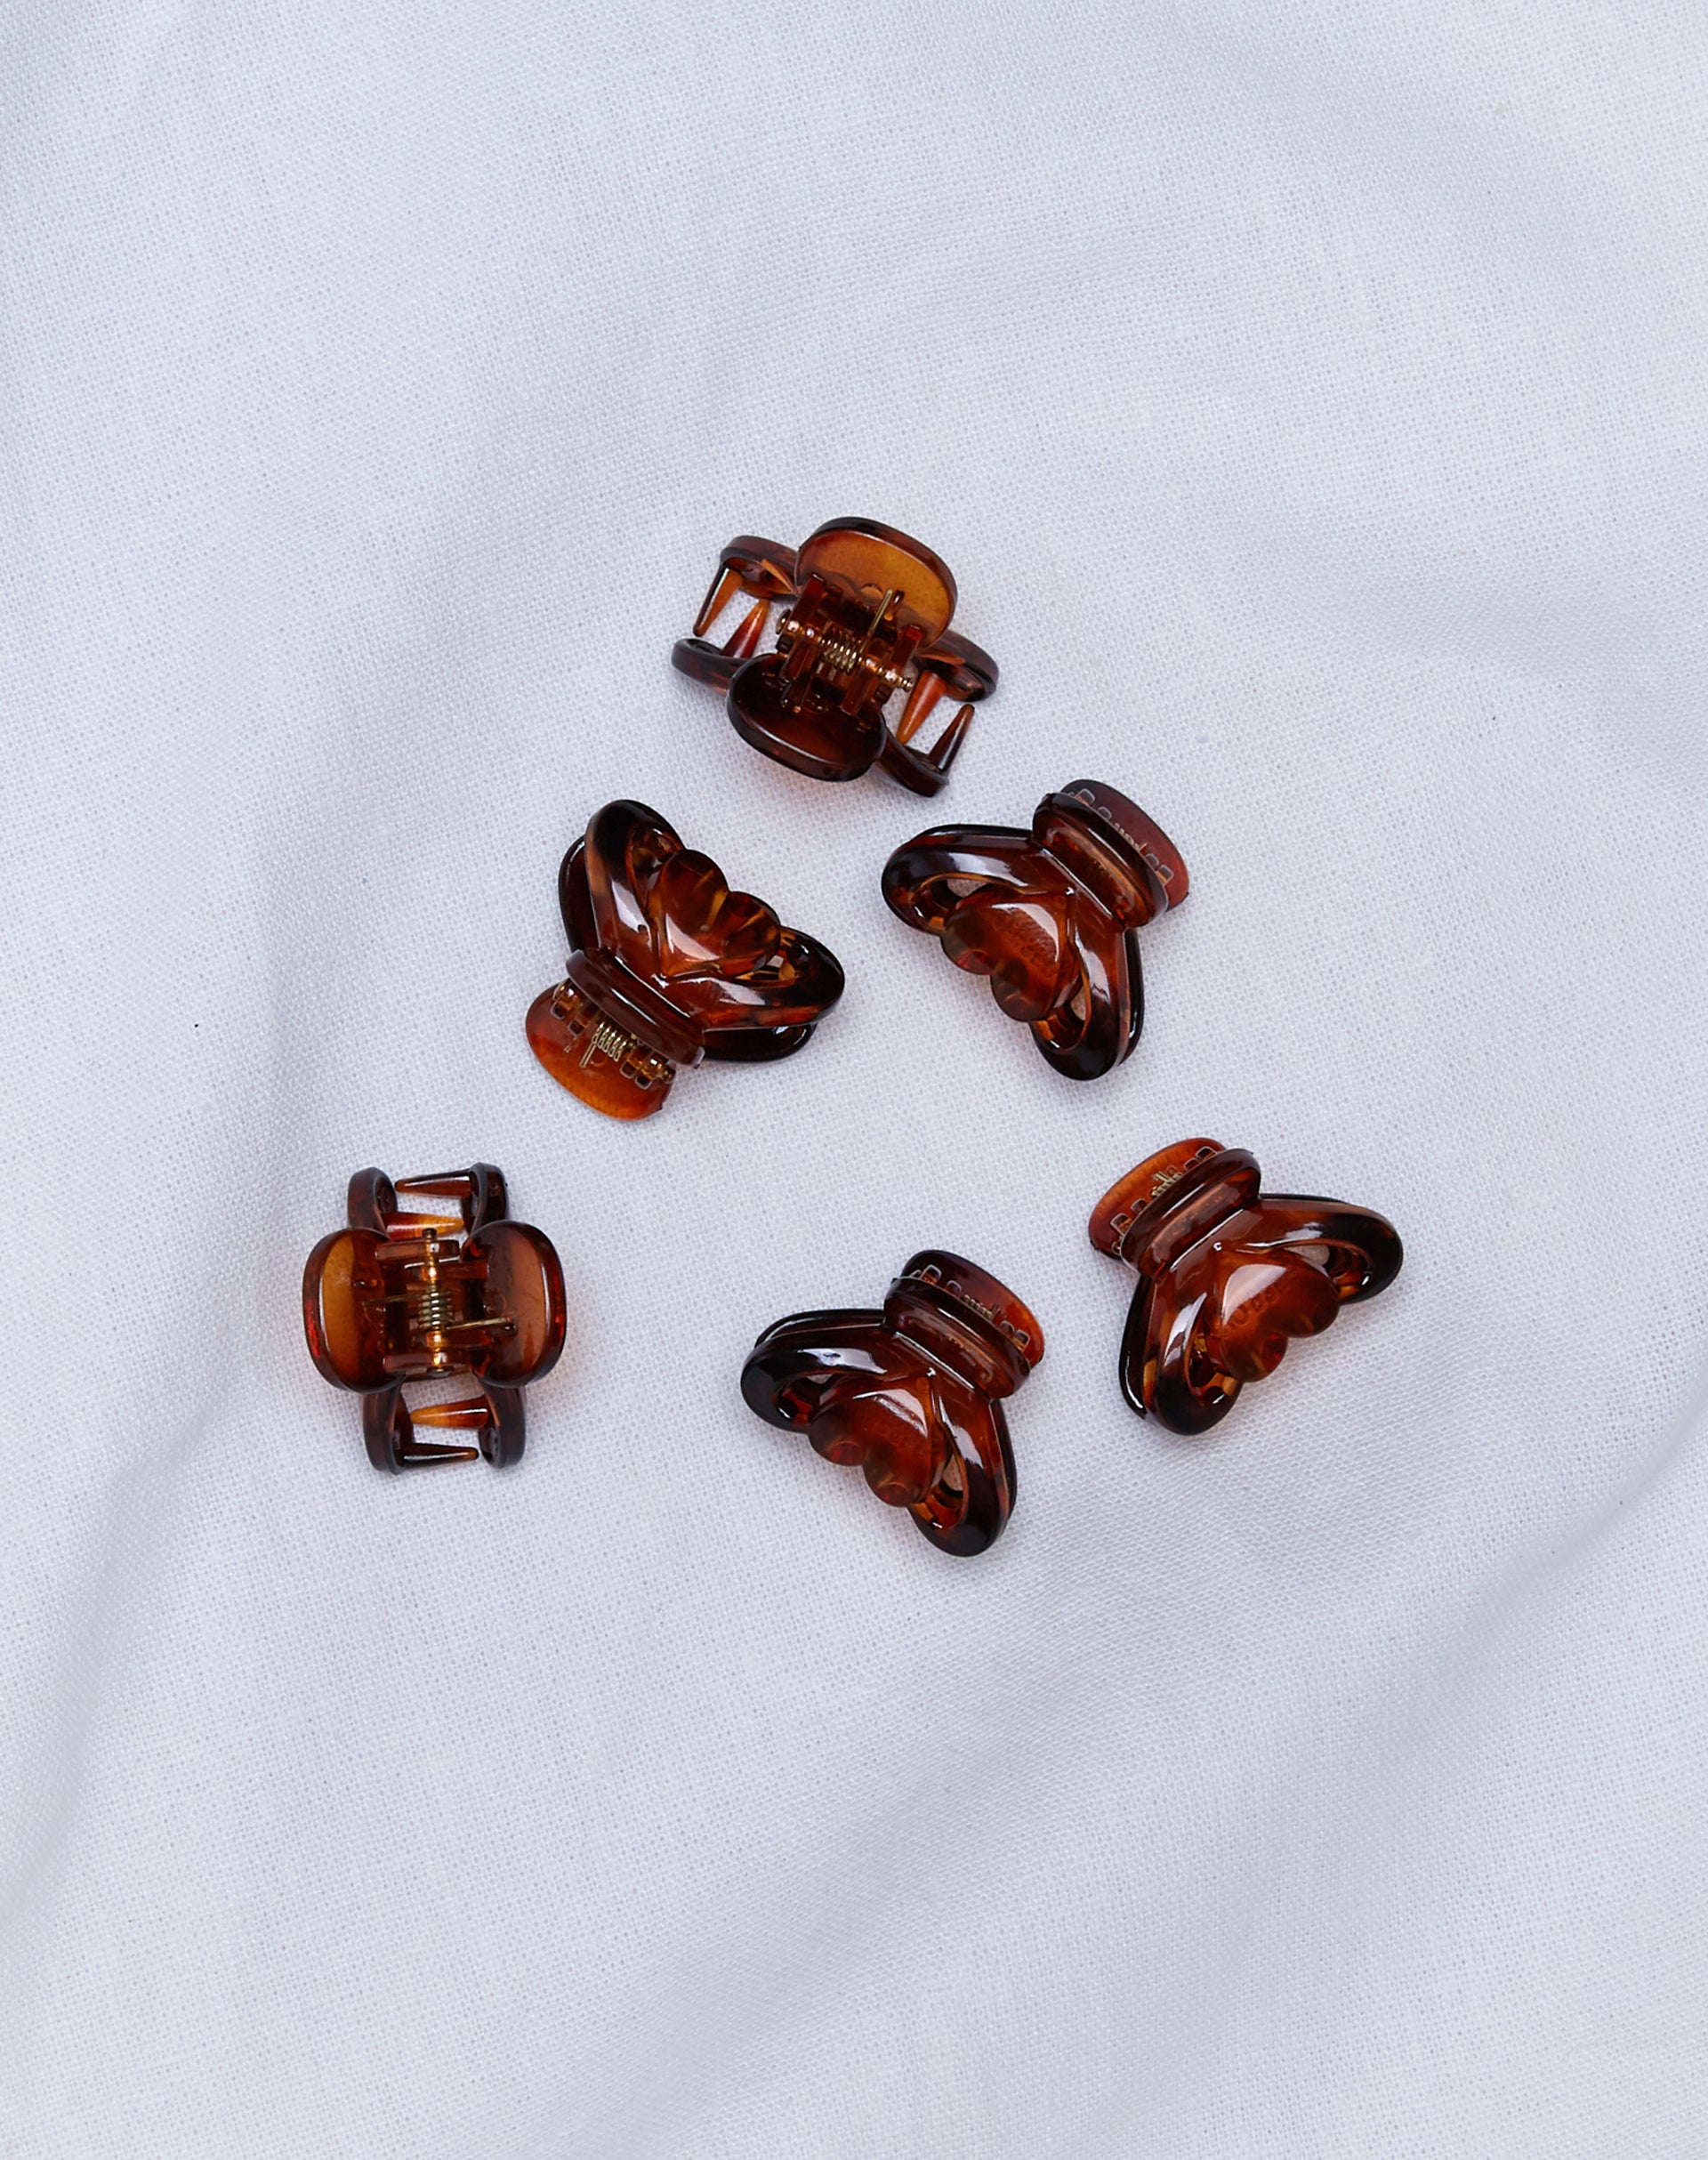 Image of Chanis Mini Hair Claw Set of 6 Pieces in Tortoise